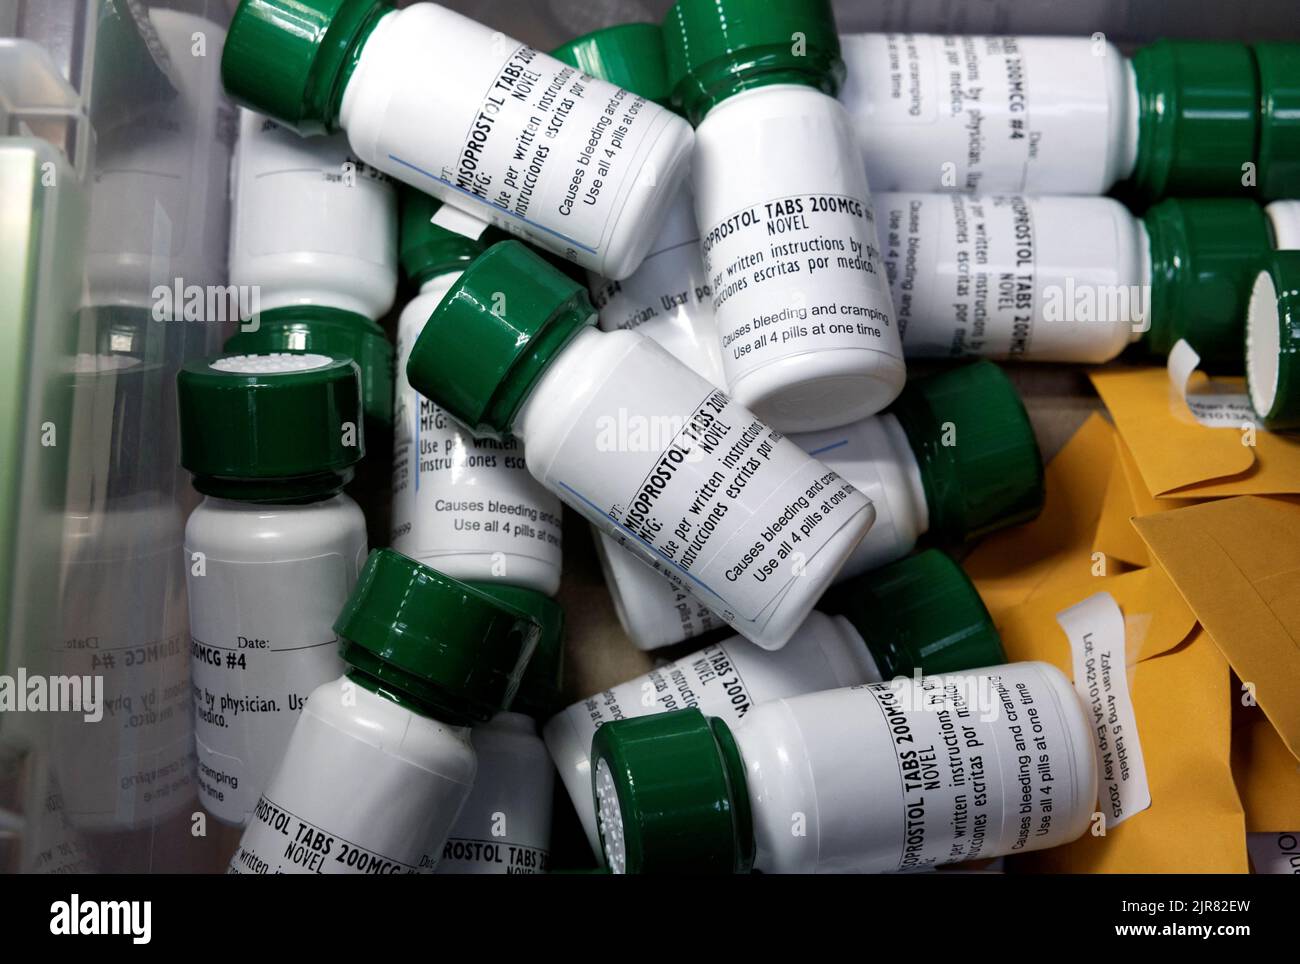 Bottles of Misoprostol, the second medication used in a medical abortion, lay unused in a storage bin at a Houston abortion clinic which stopped providing abortions when the U.S. Supreme Court overturned Roe v. Wade, in Texas, U.S., July 7, 2022. REUTERS/Evelyn Hockstein Stock Photo